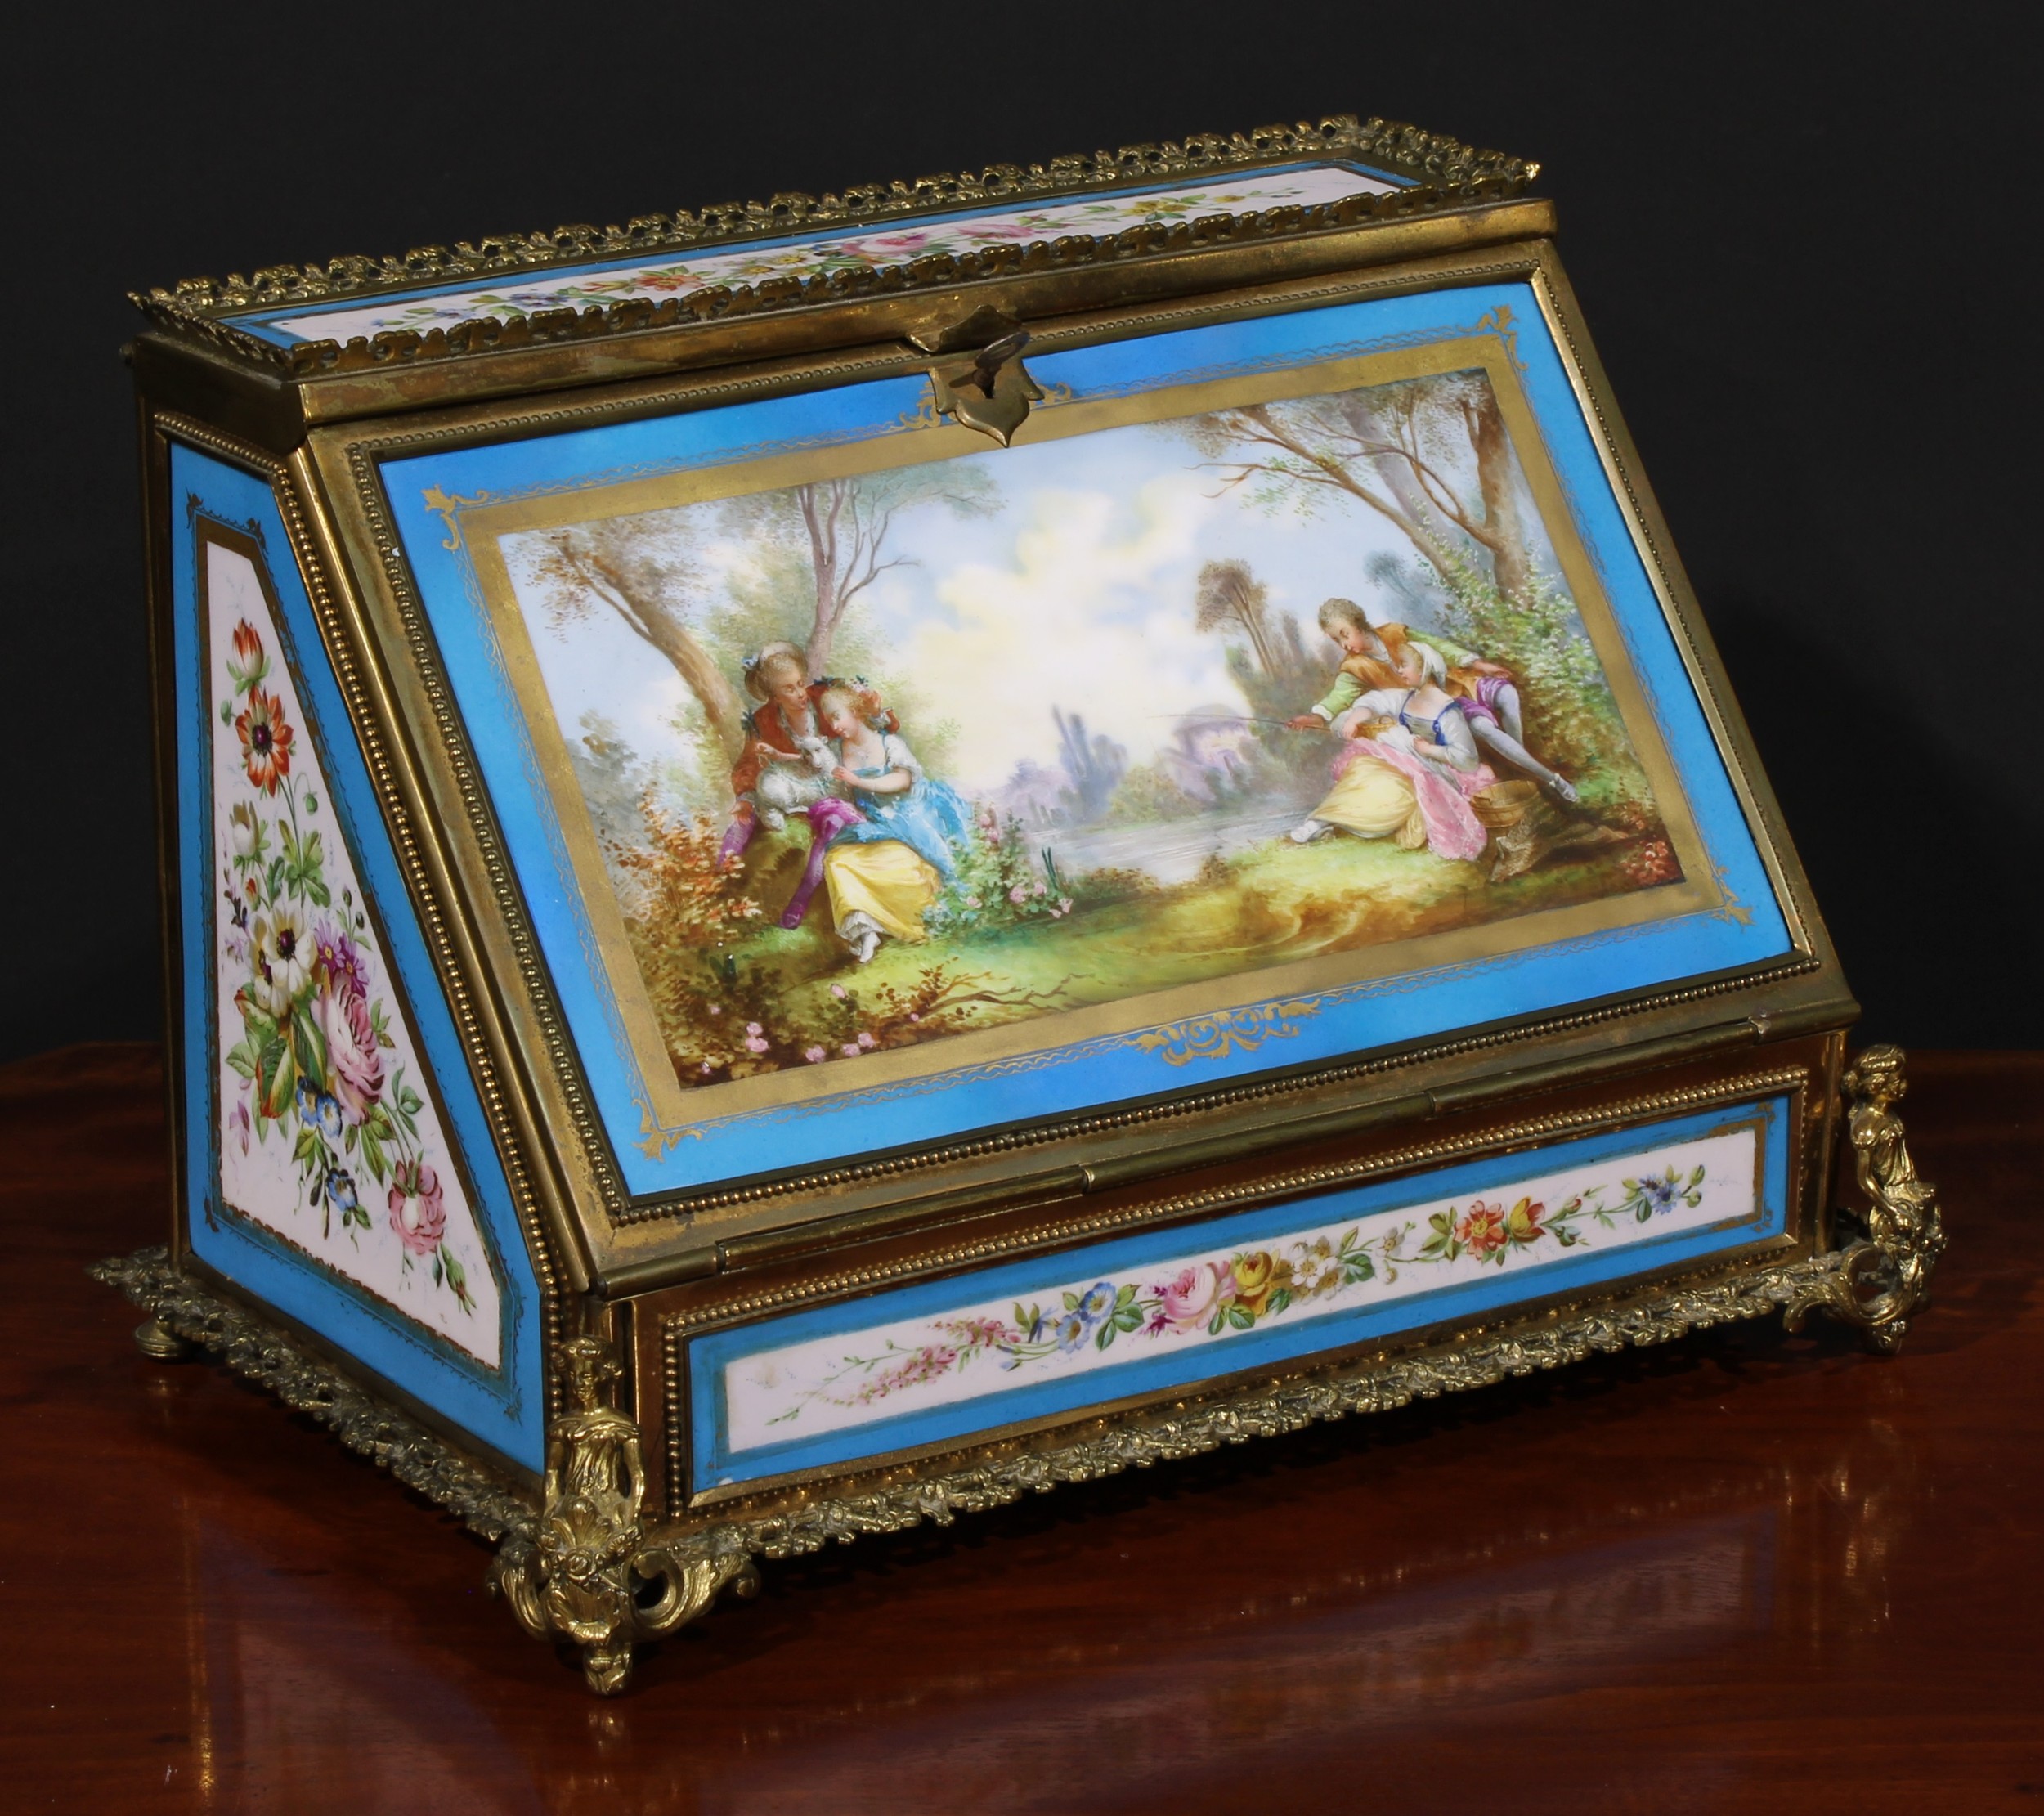 A 19th century French Palais Royal gilt metal and porcelain mounted table top writing and stationery